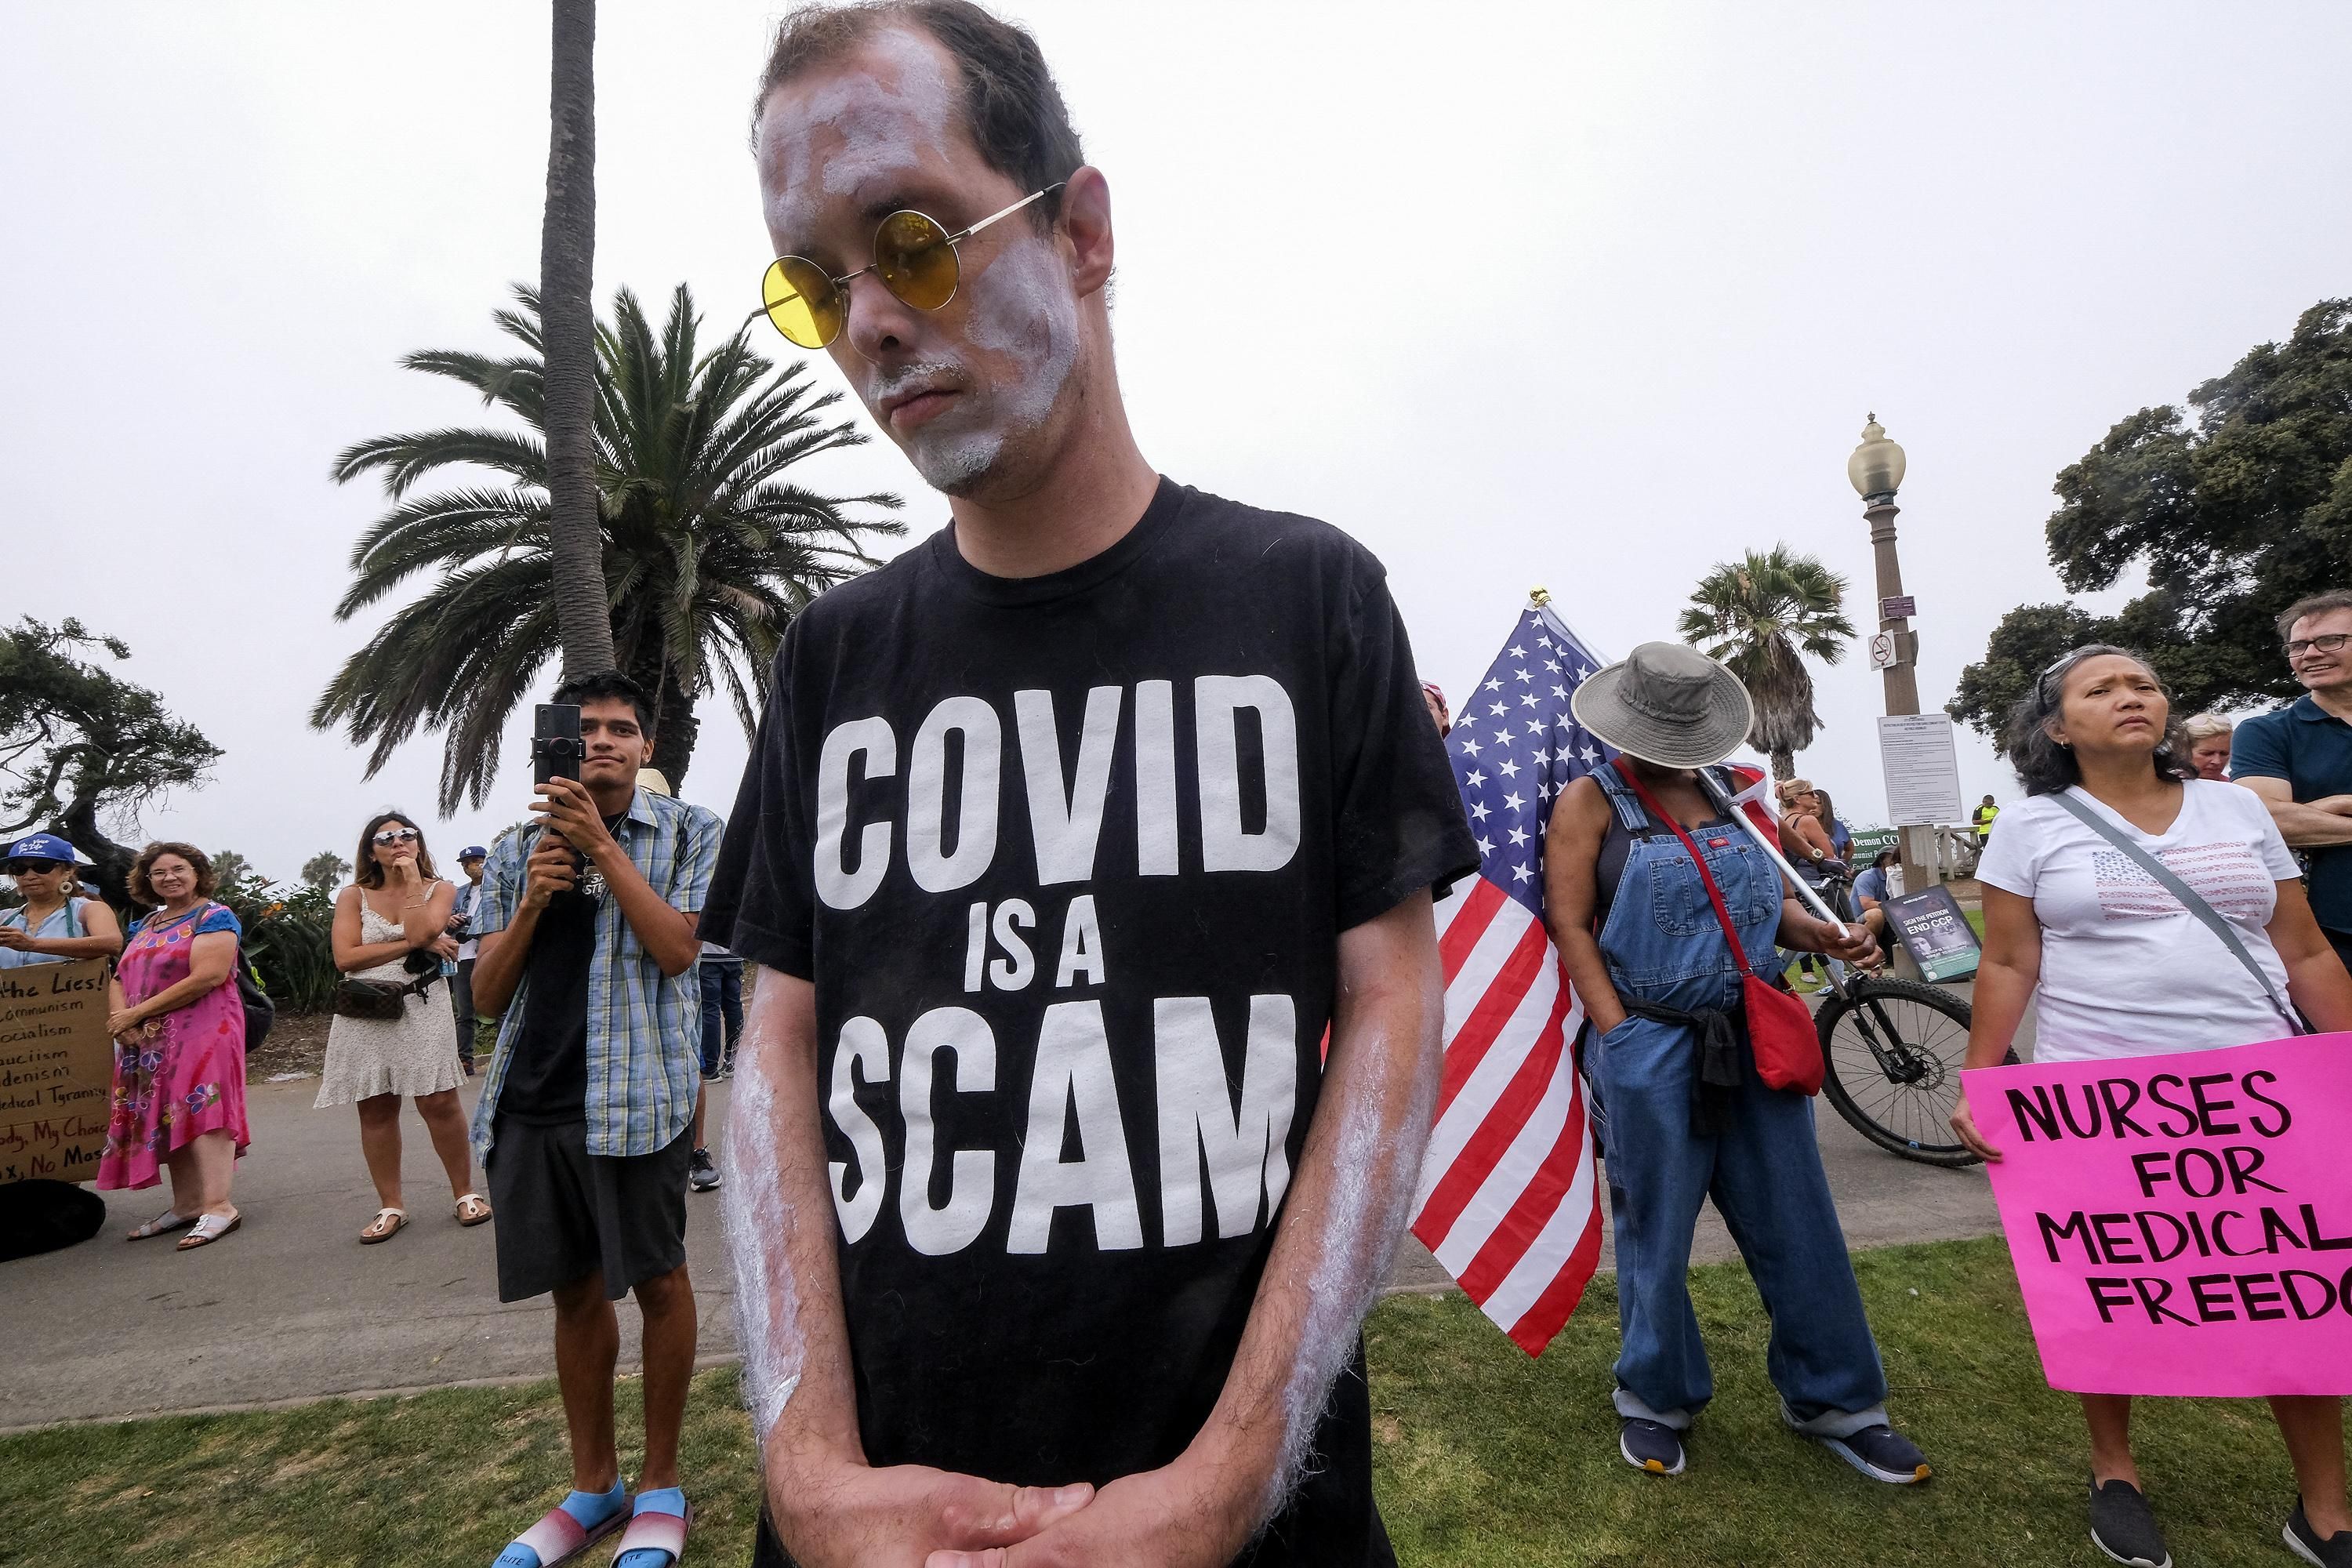 A man wears a shirt saying "Covid is a scam"